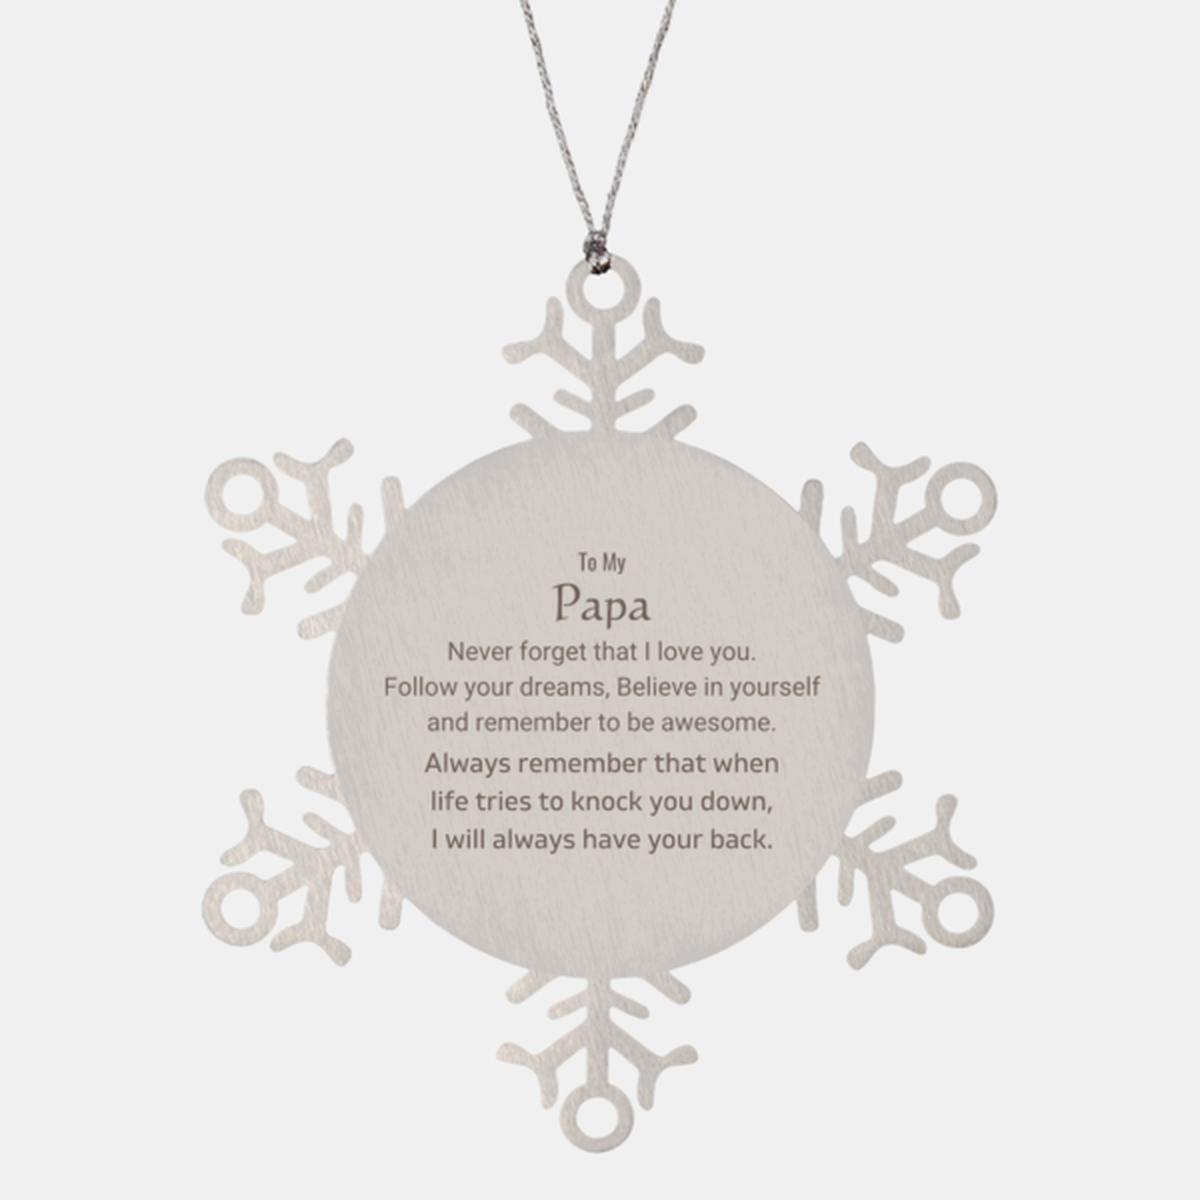 Inspirational Gifts for Papa, Follow your dreams, Believe in yourself, Papa Snowflake Ornament, Birthday Christmas Unique Gifts For Papa